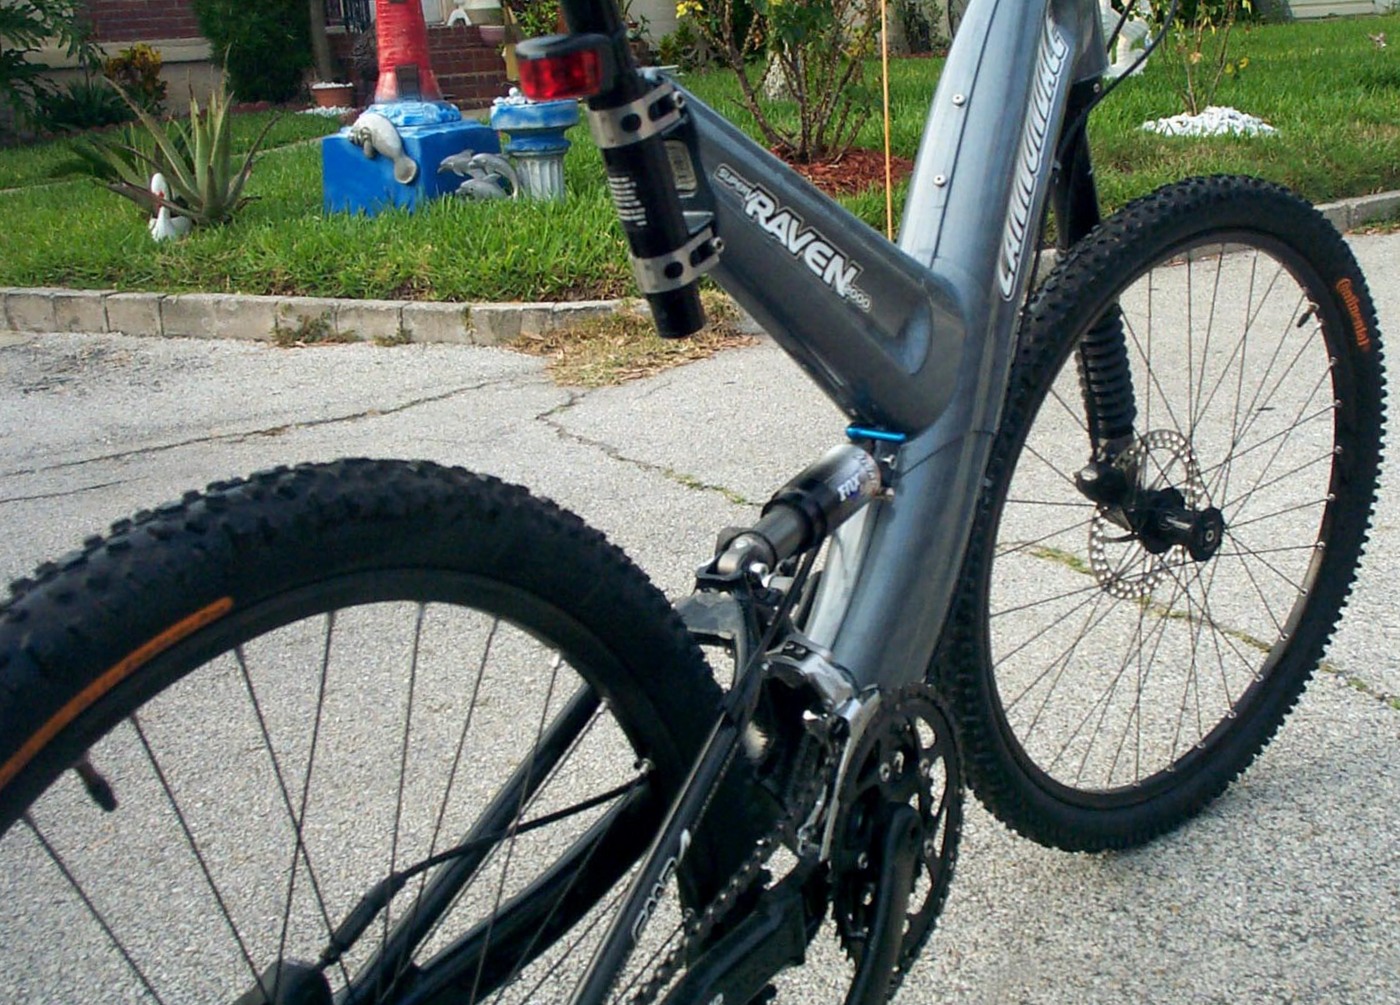 My Biggest Purchase Fail Ever – A Super Bicycle